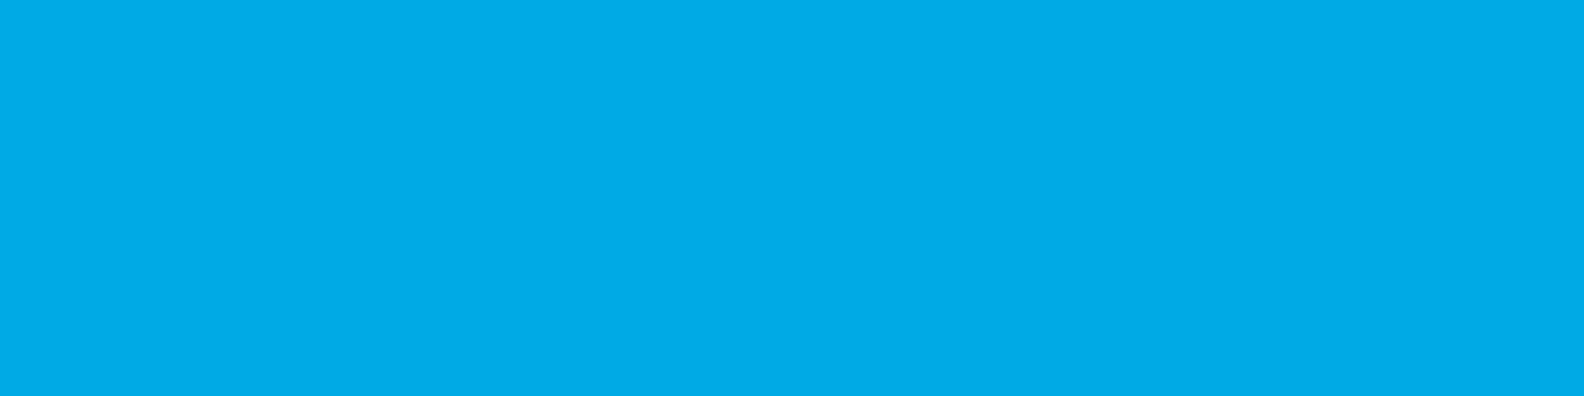 1584x396 Spanish Sky Blue Solid Color Background